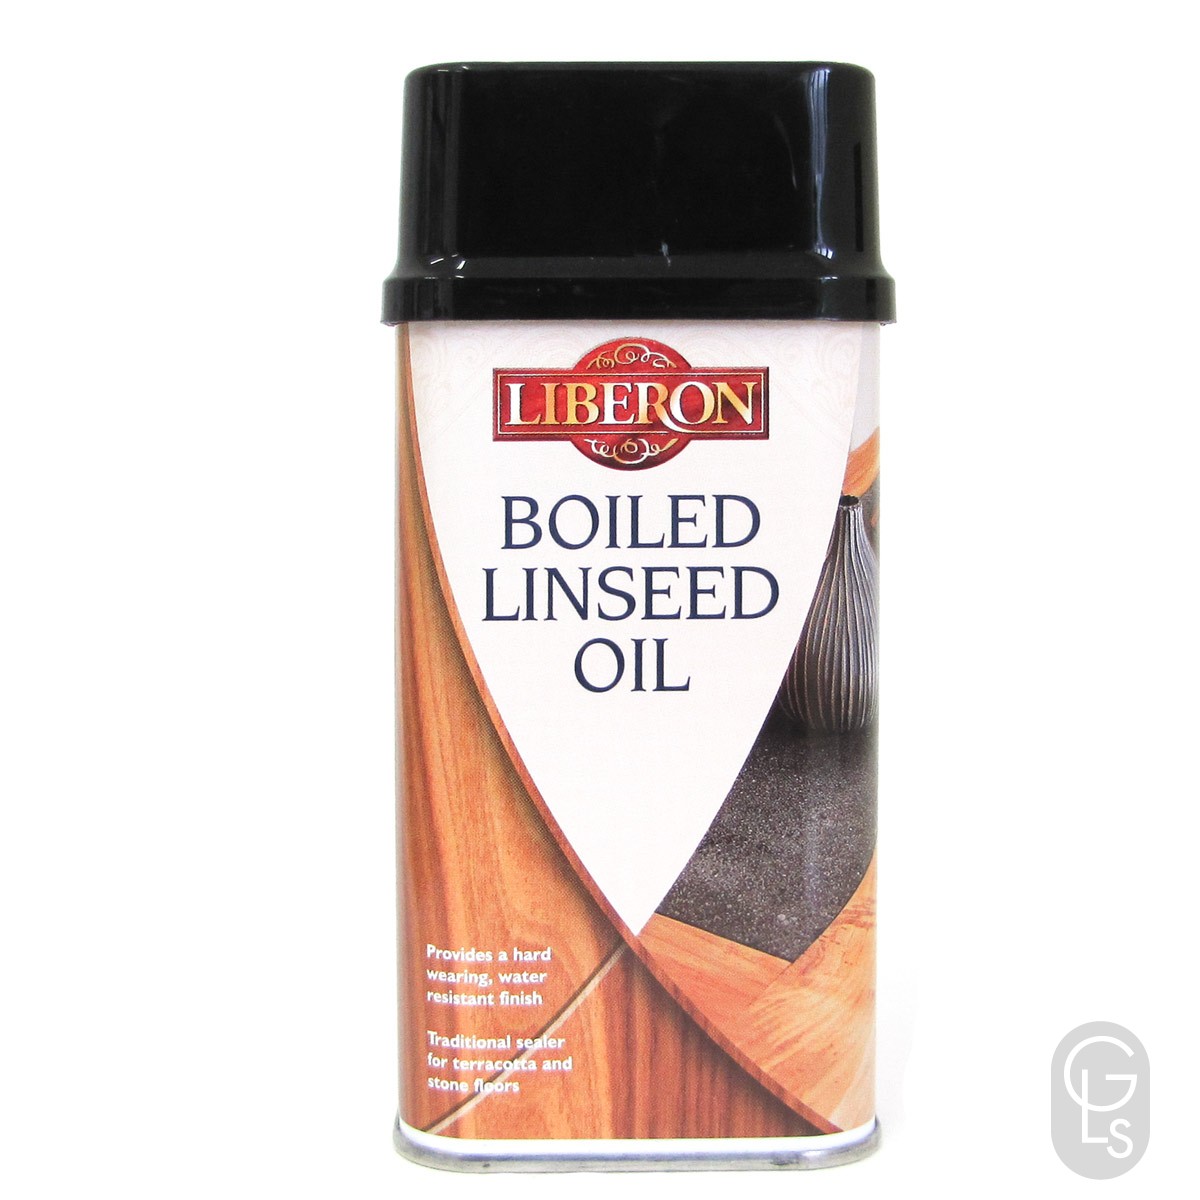 Boiled Linseed Oil (8.5 fl.oz. / 250ml) - Refined Oil for Wood Furniture